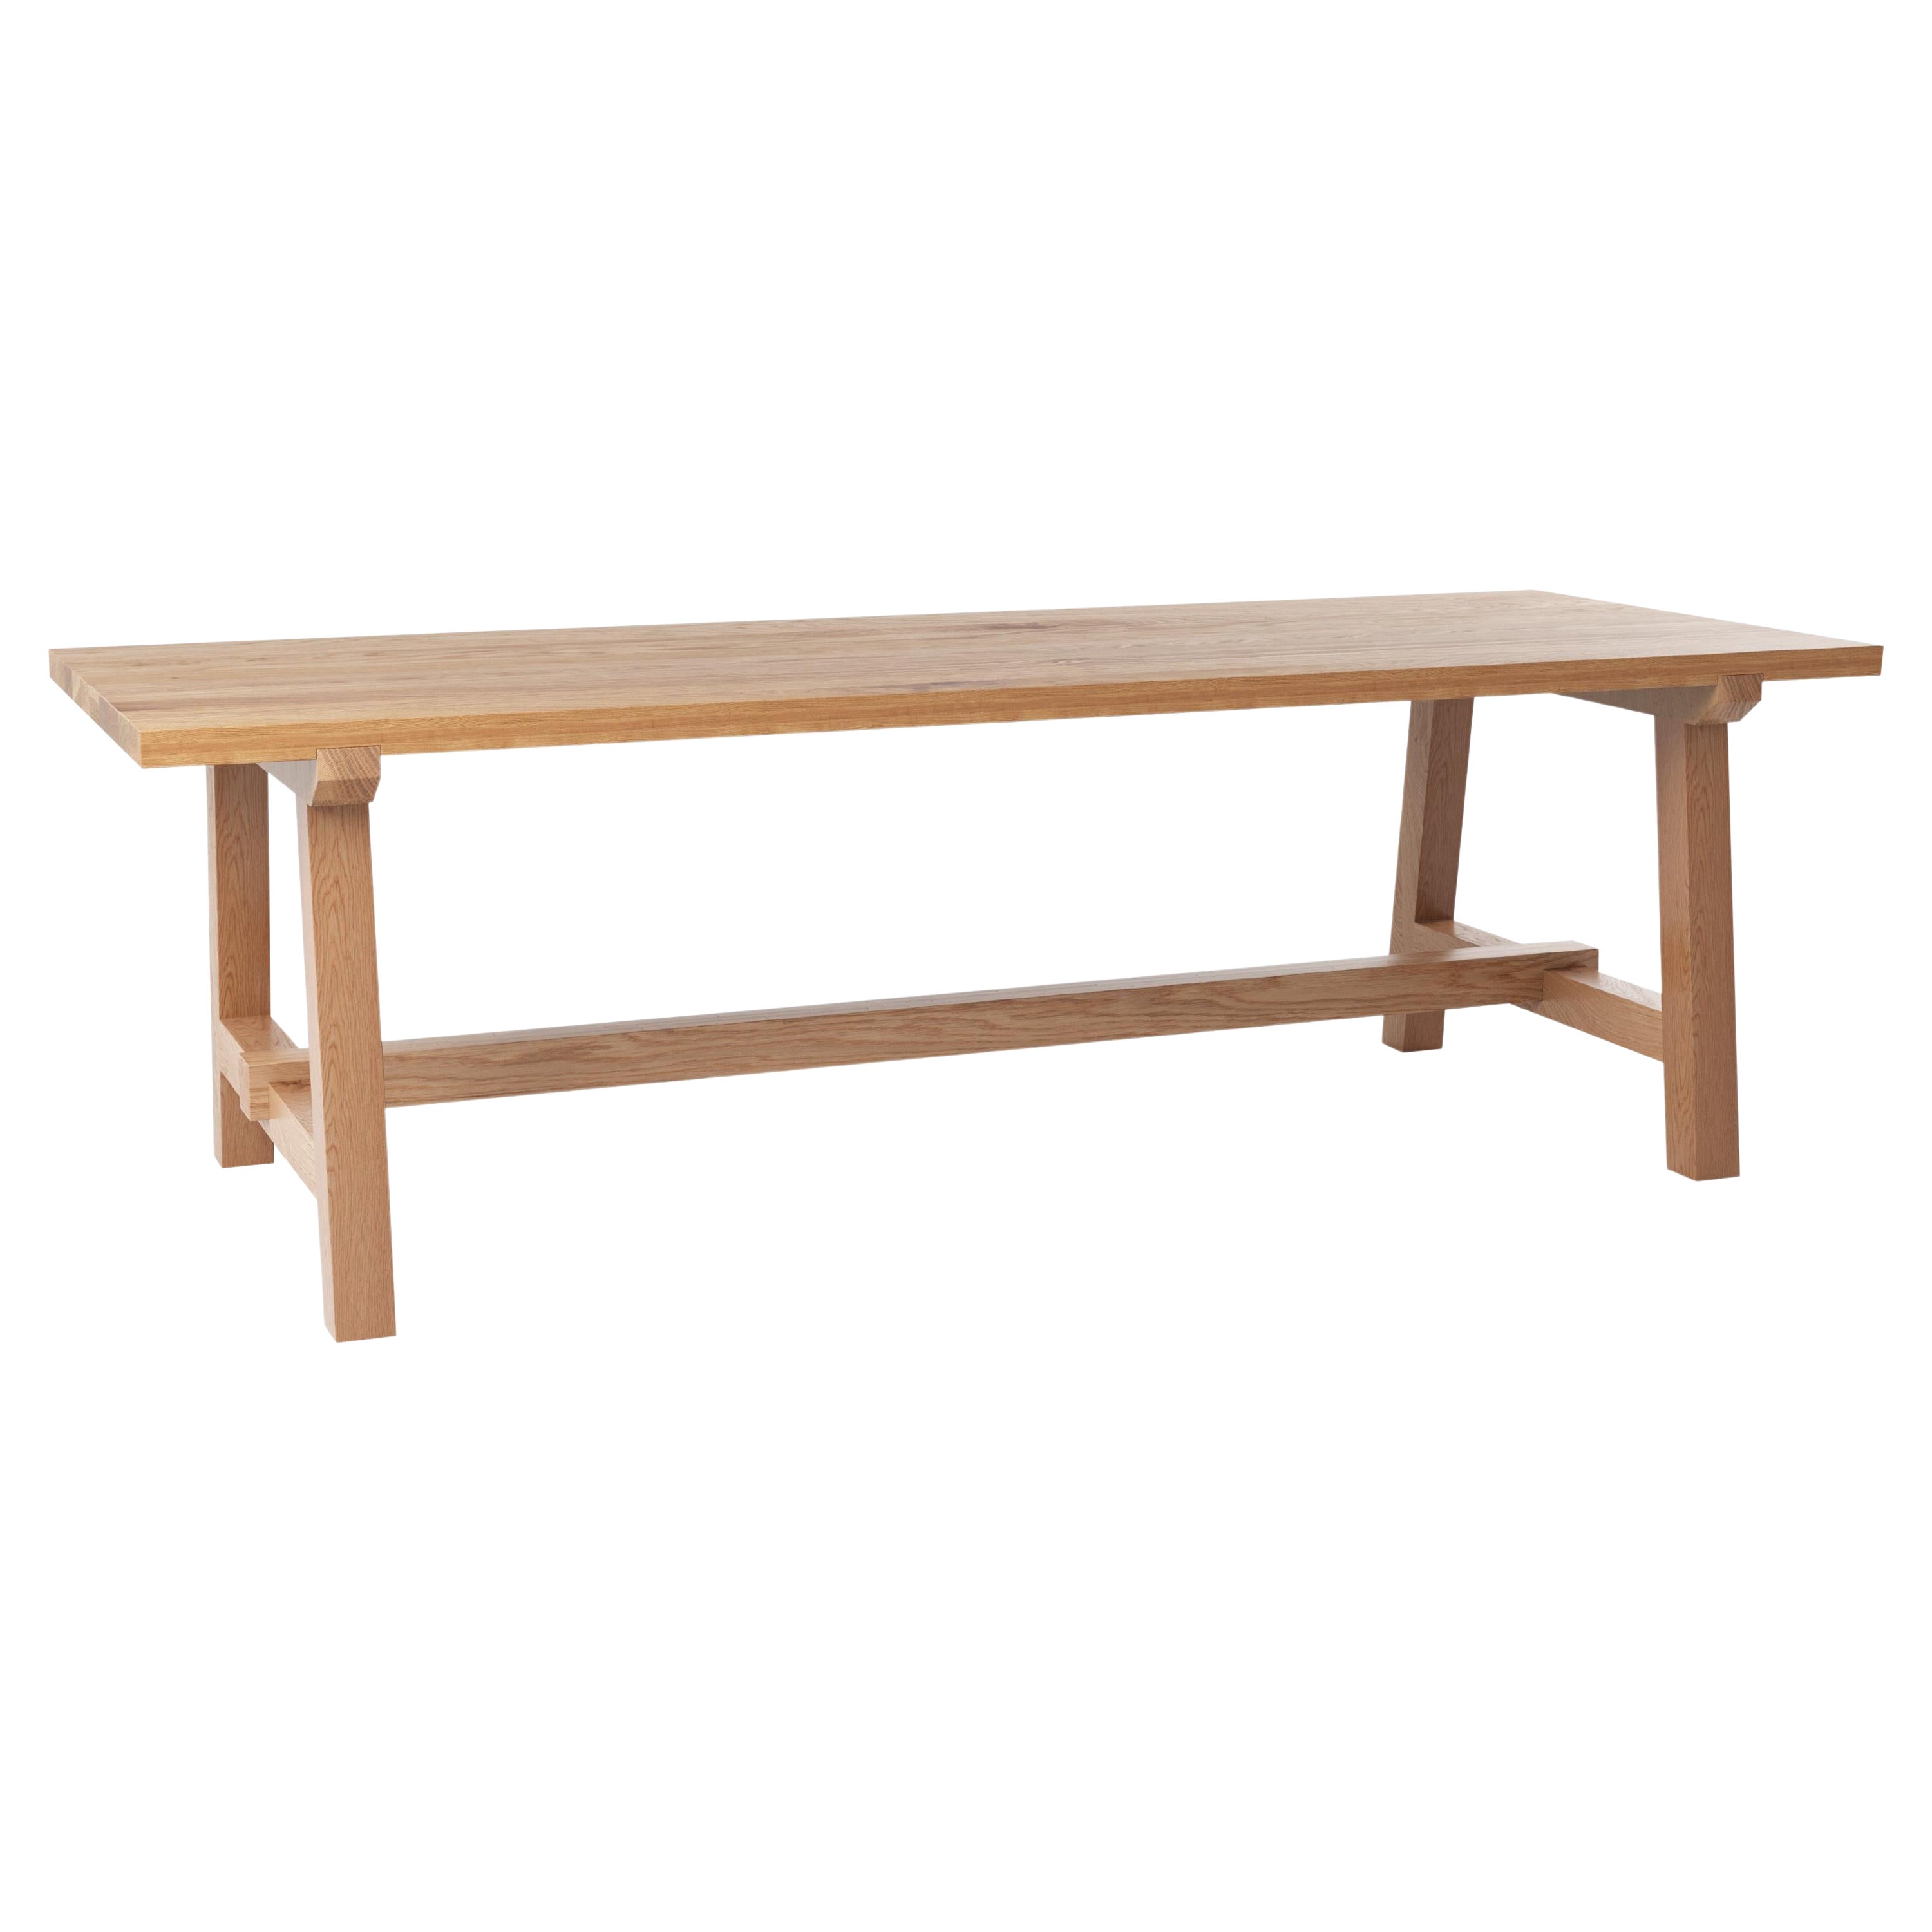 Union Wood Co. Dining Room Tables